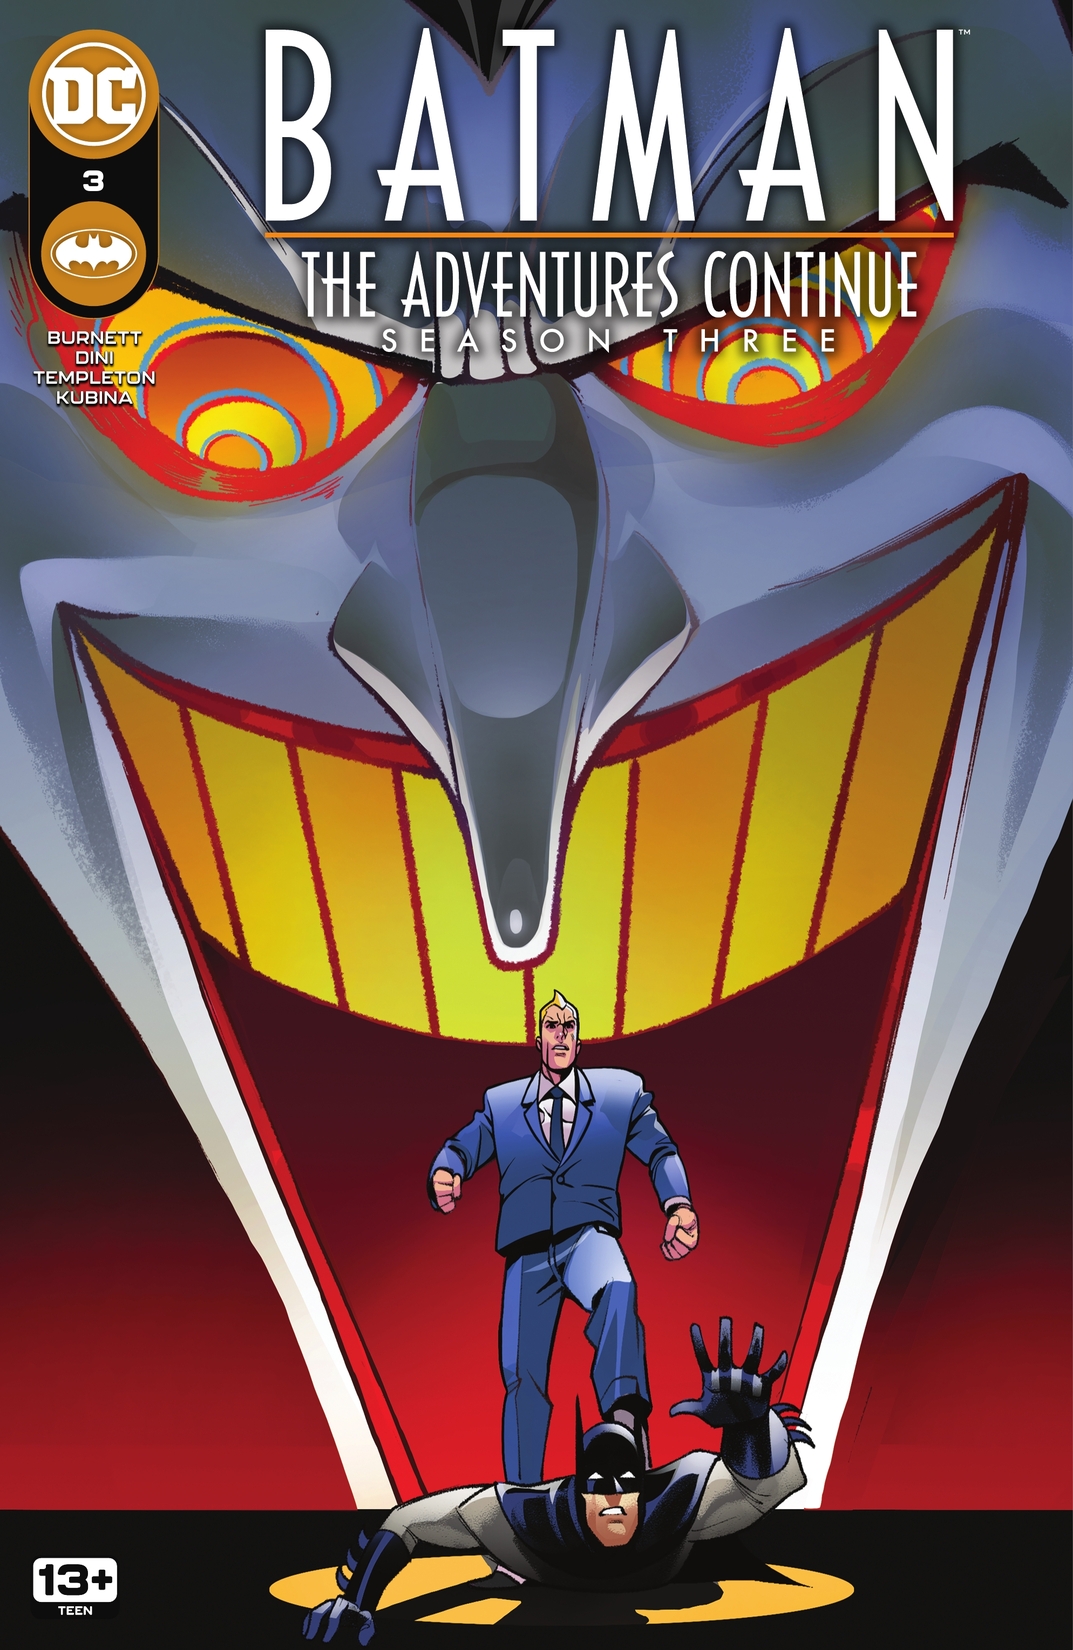 Batman: The Adventures Continue Season Three #3 preview images